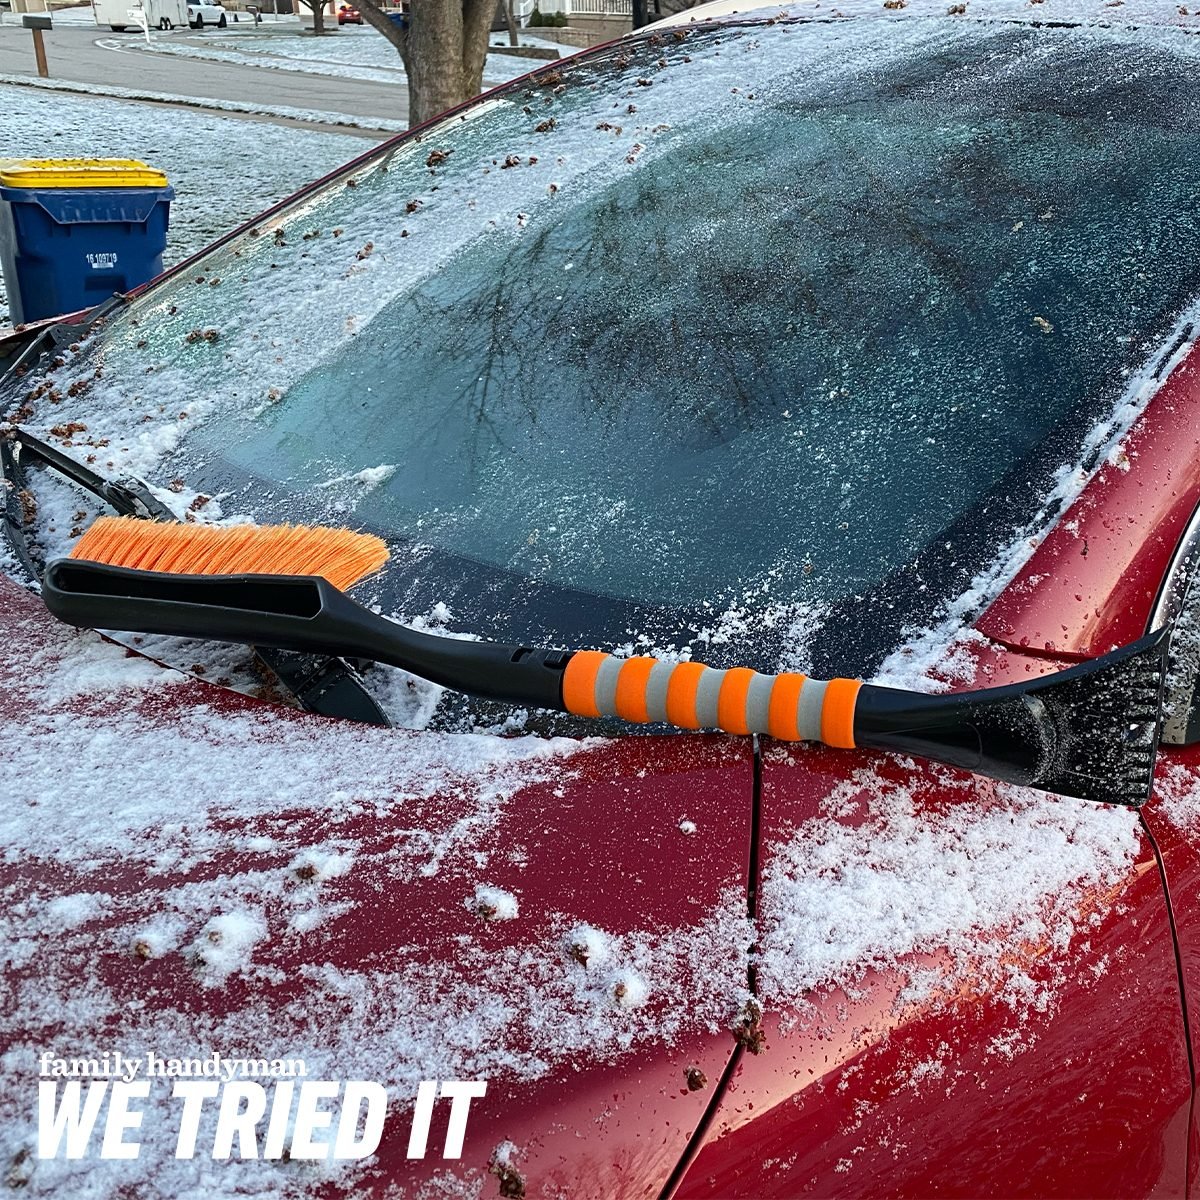 https://www.familyhandyman.com/wp-content/uploads/2023/03/This-Viral-Car-Ice-Scraper-Will-Save-You-Time-on-Snowy-Mornings1_FT_via-amazon.com_.jpg?fit=700,700